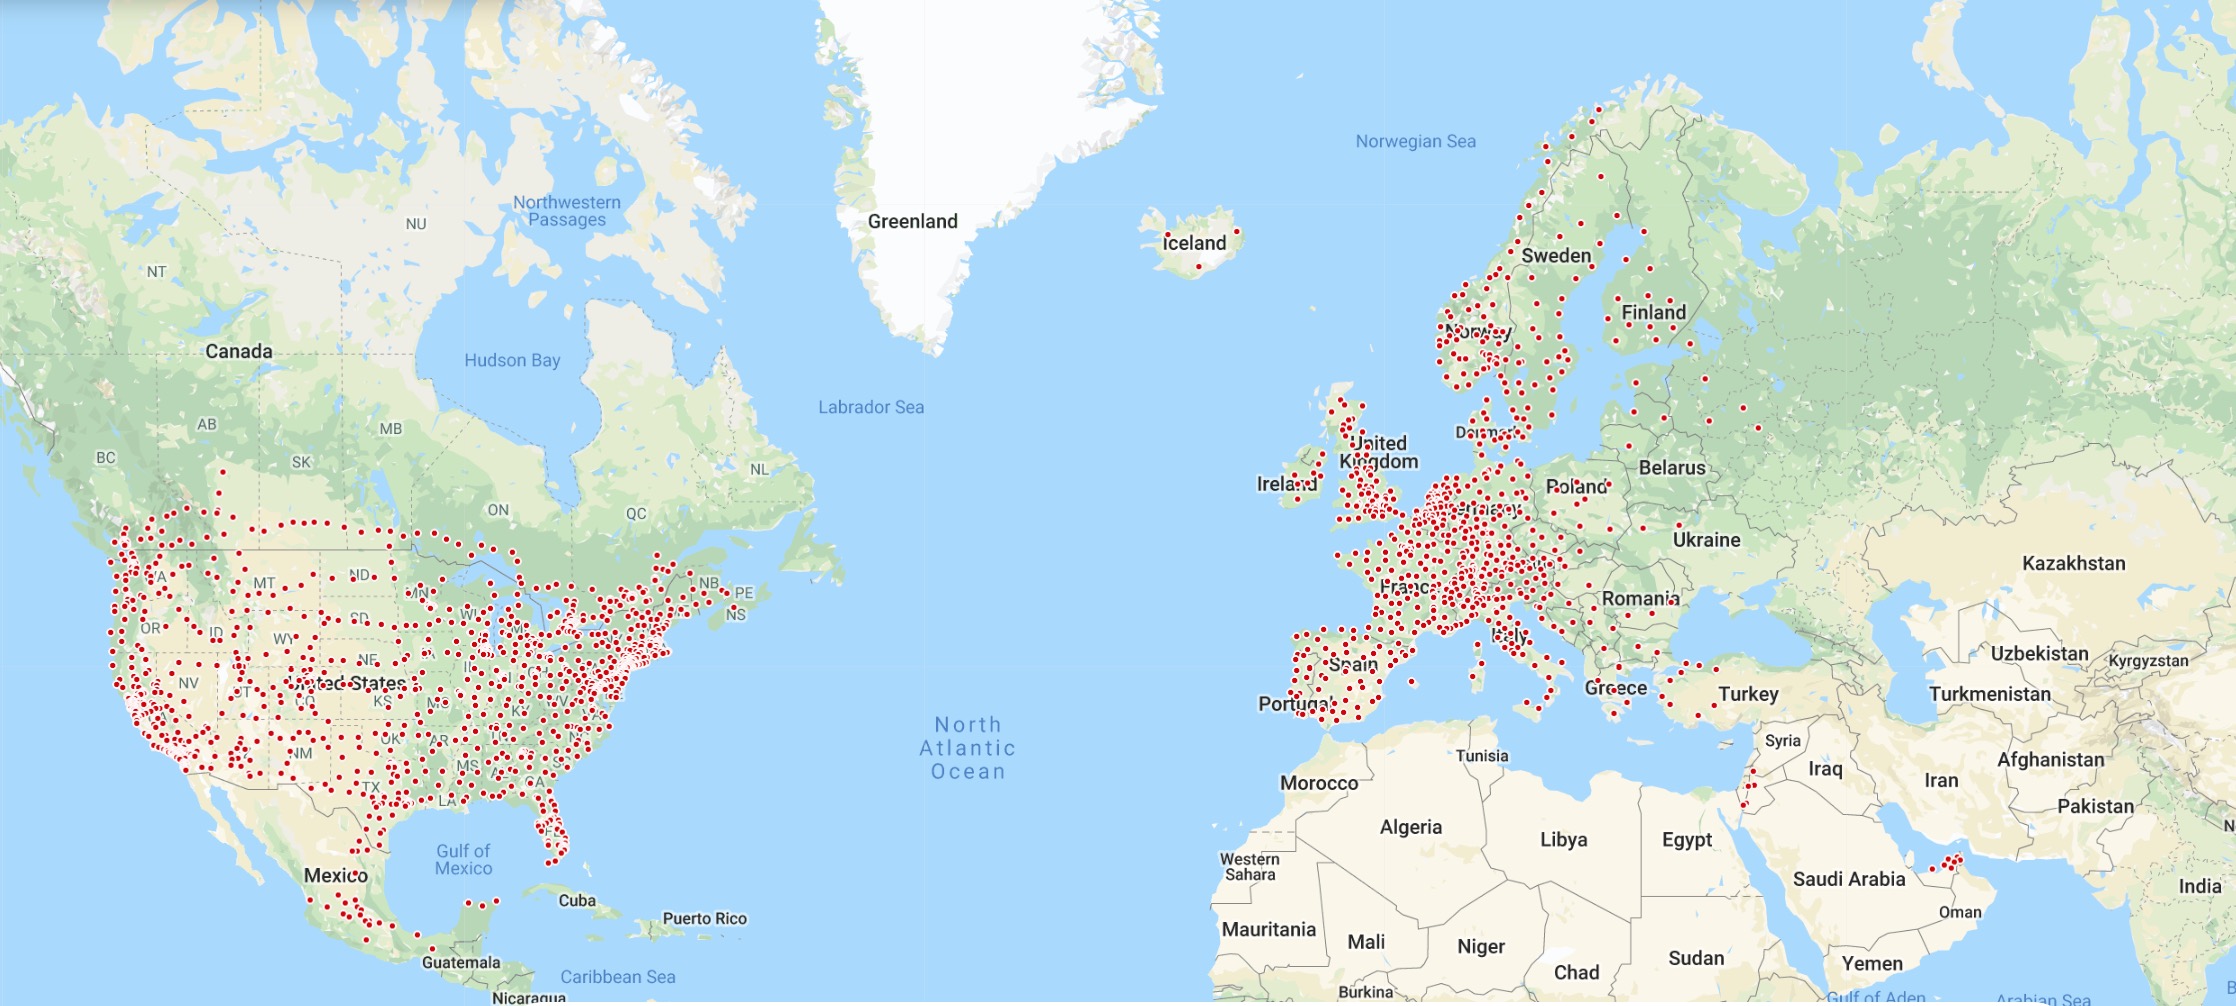 Tesla updates map of Supercharger stations showing where it